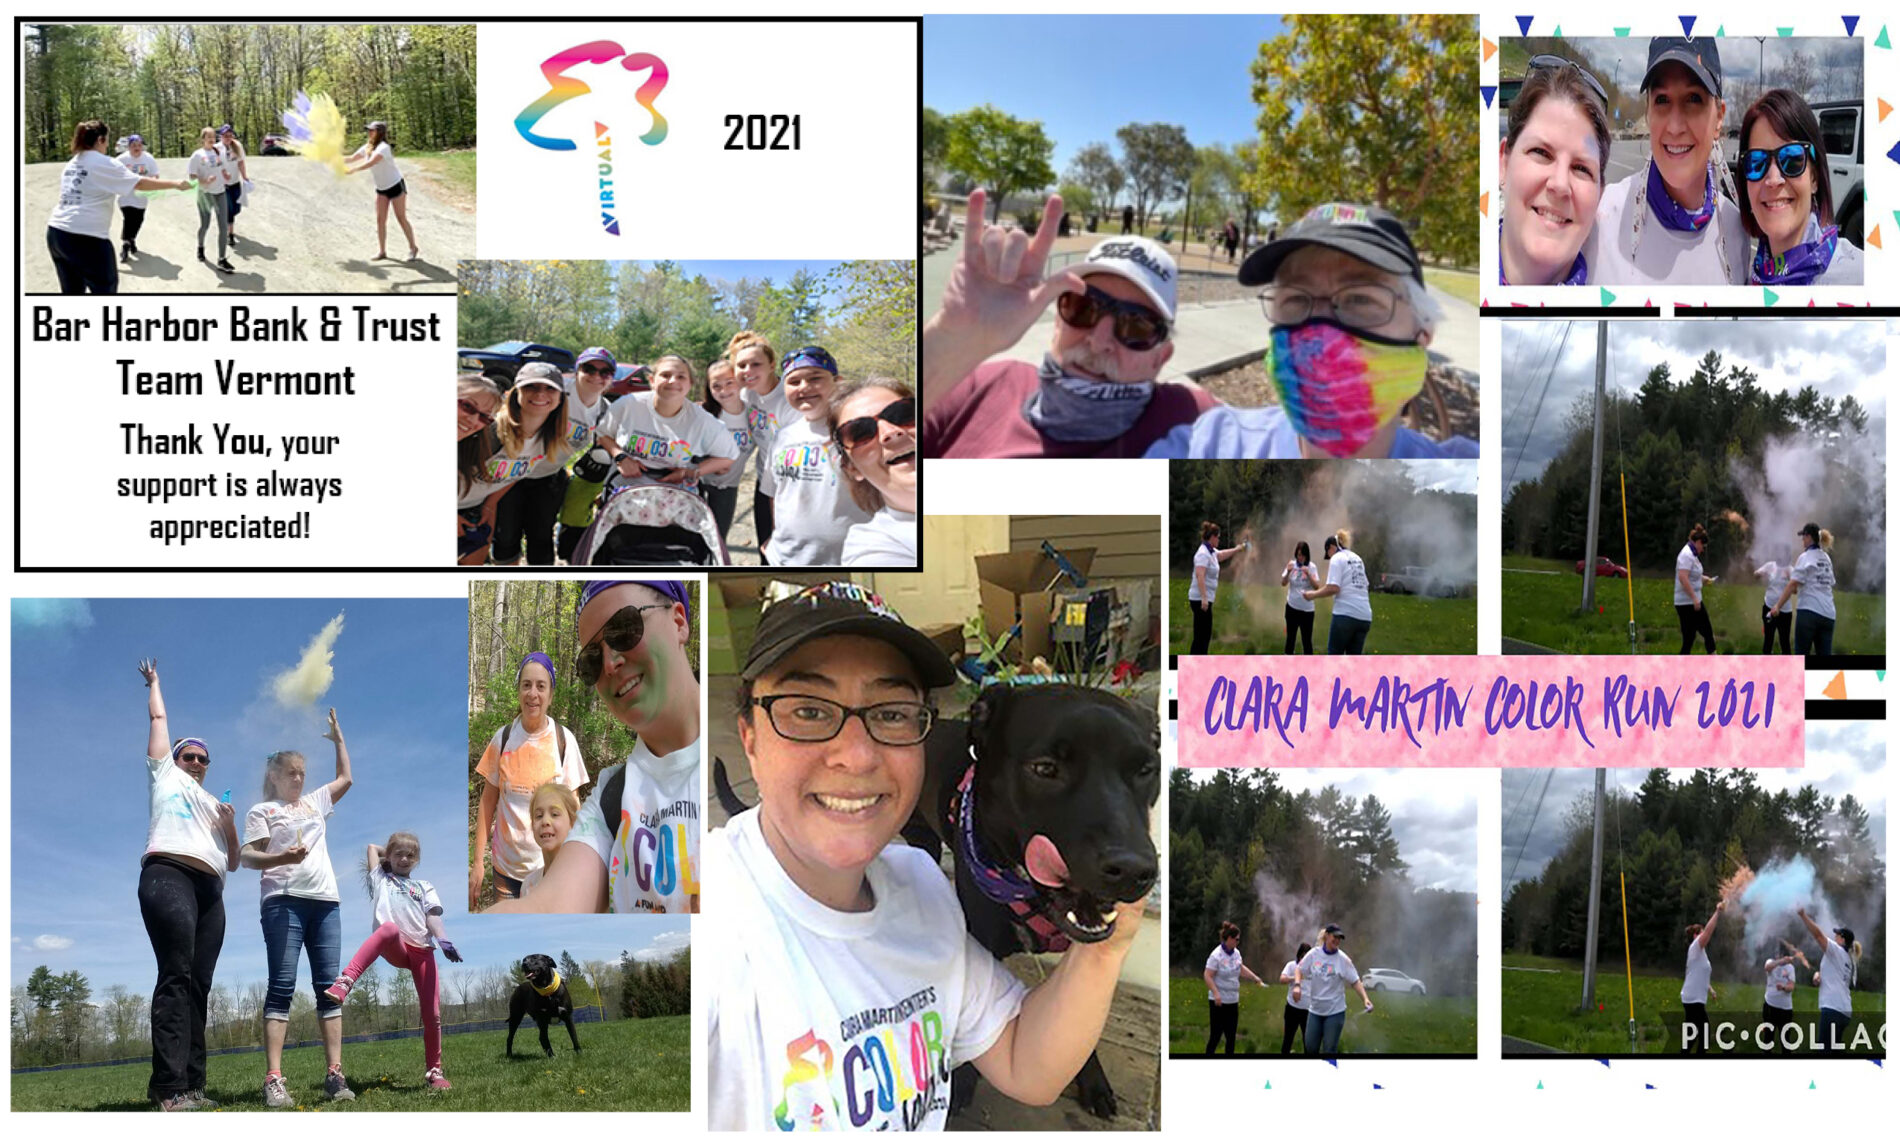 Collage of photos from the Clara Martin Color Run in 2021